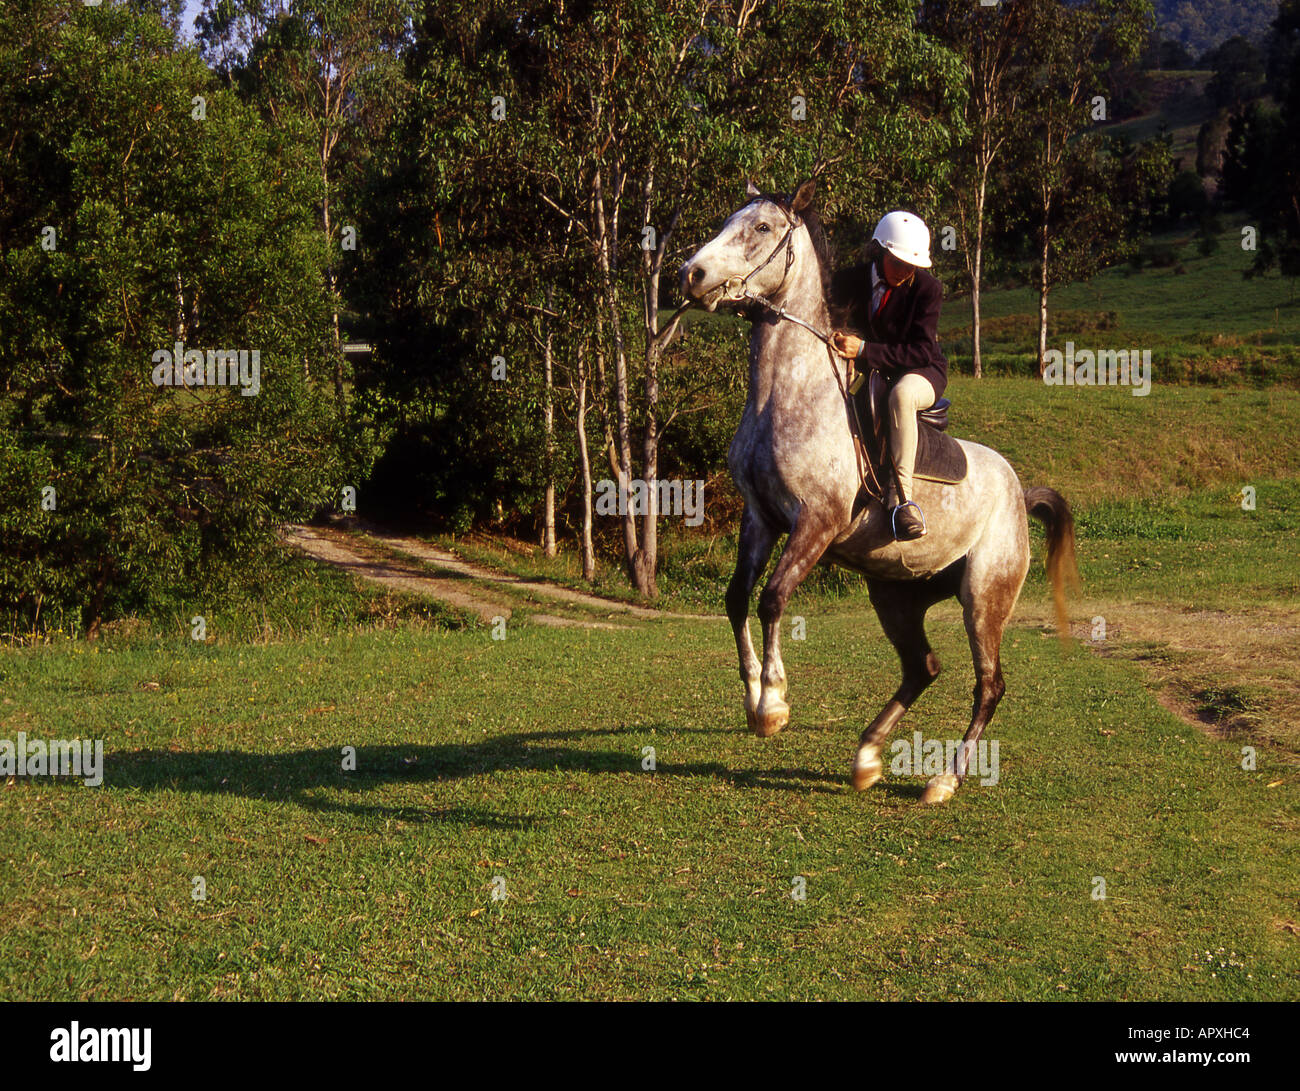 single girl on grey horse in paddock, with horse rearing up Stock Photo